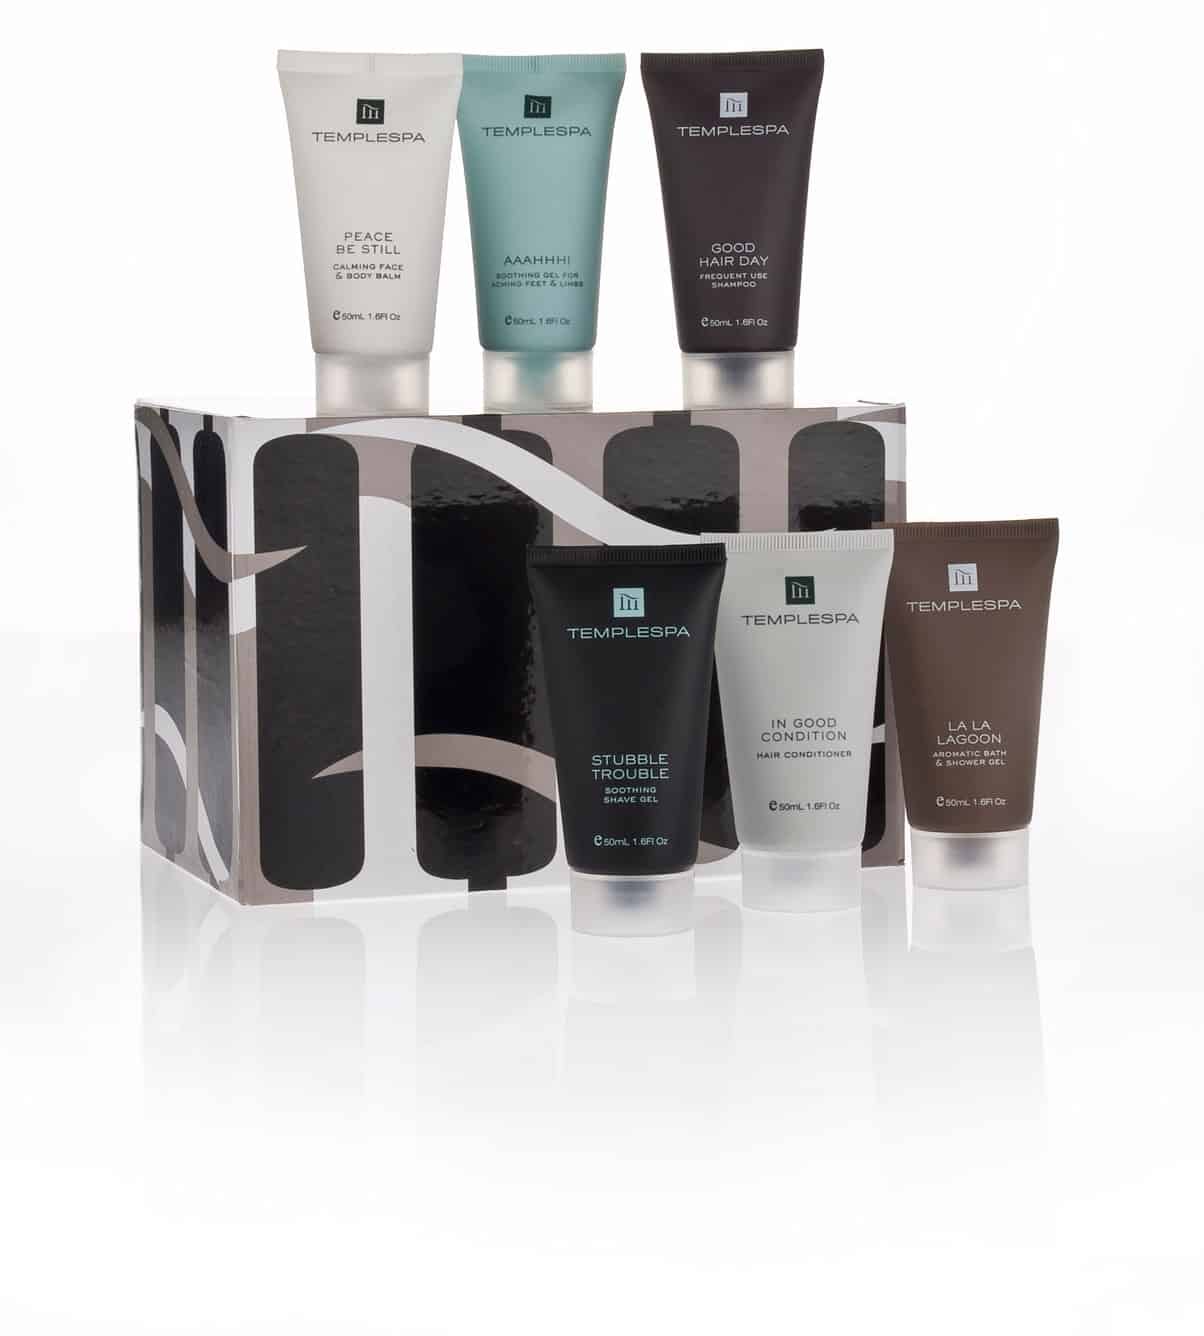 Gift set packaging graphics for Temple Spa's'The Voyager' product.